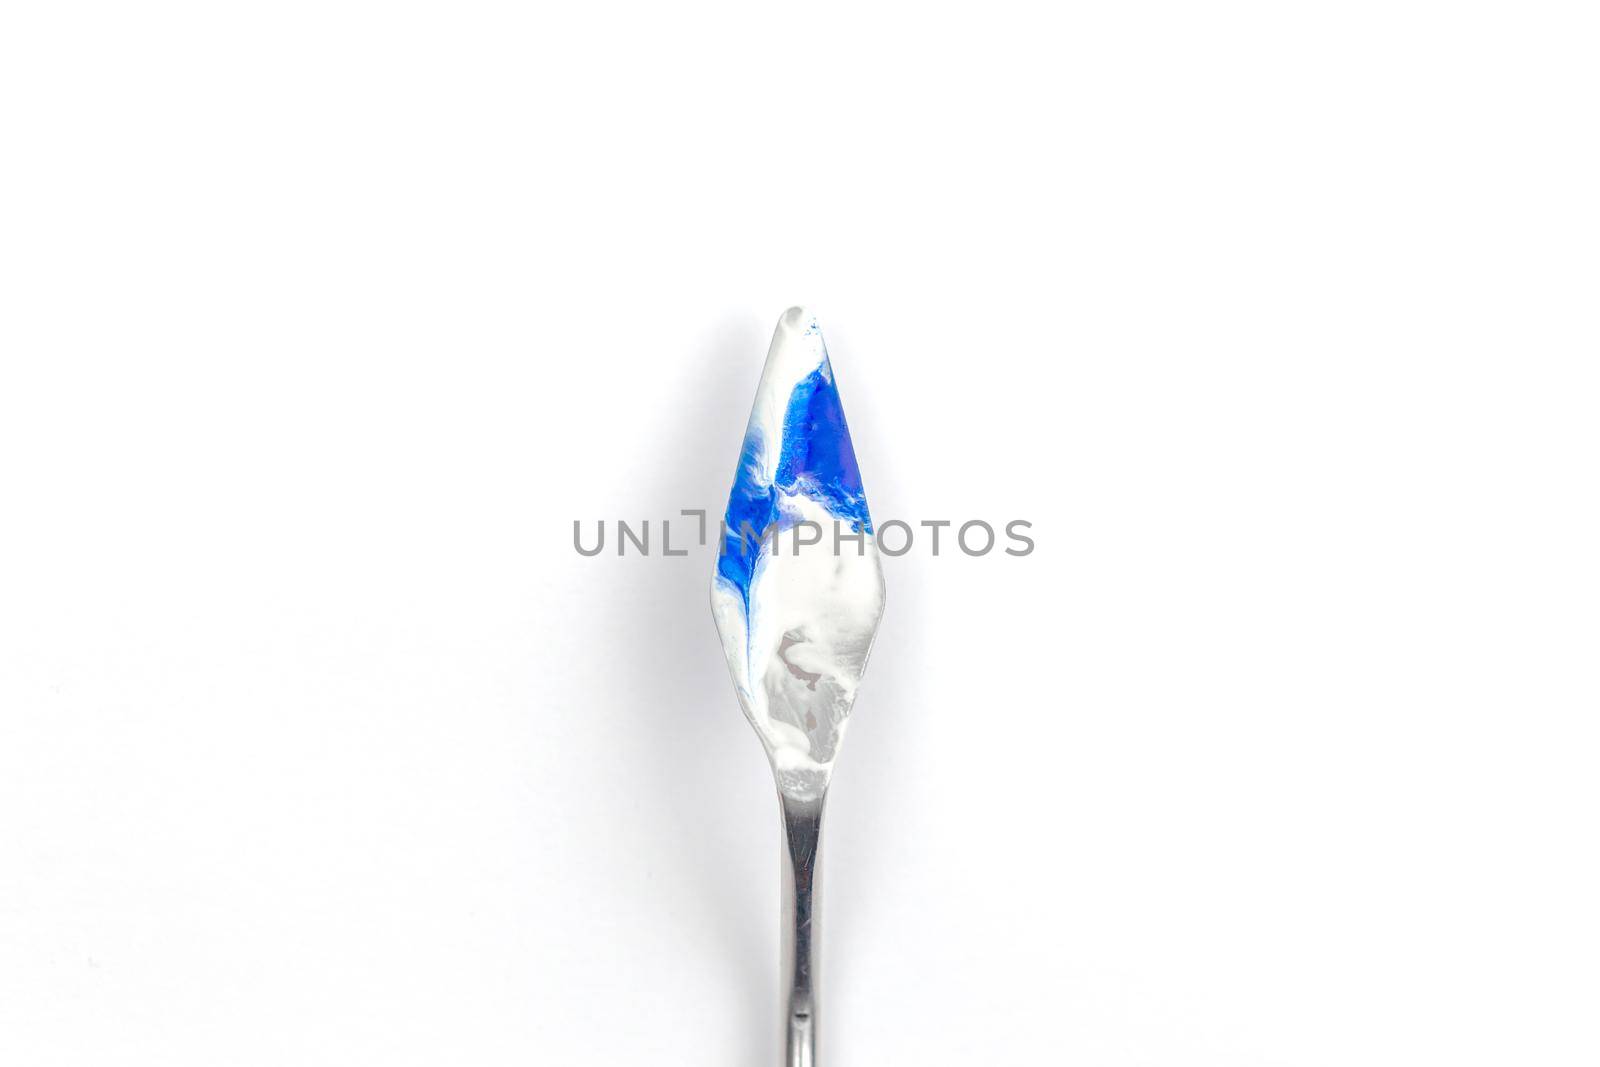 a painting palette knife isolated on a white background painting a blue teal with copy space